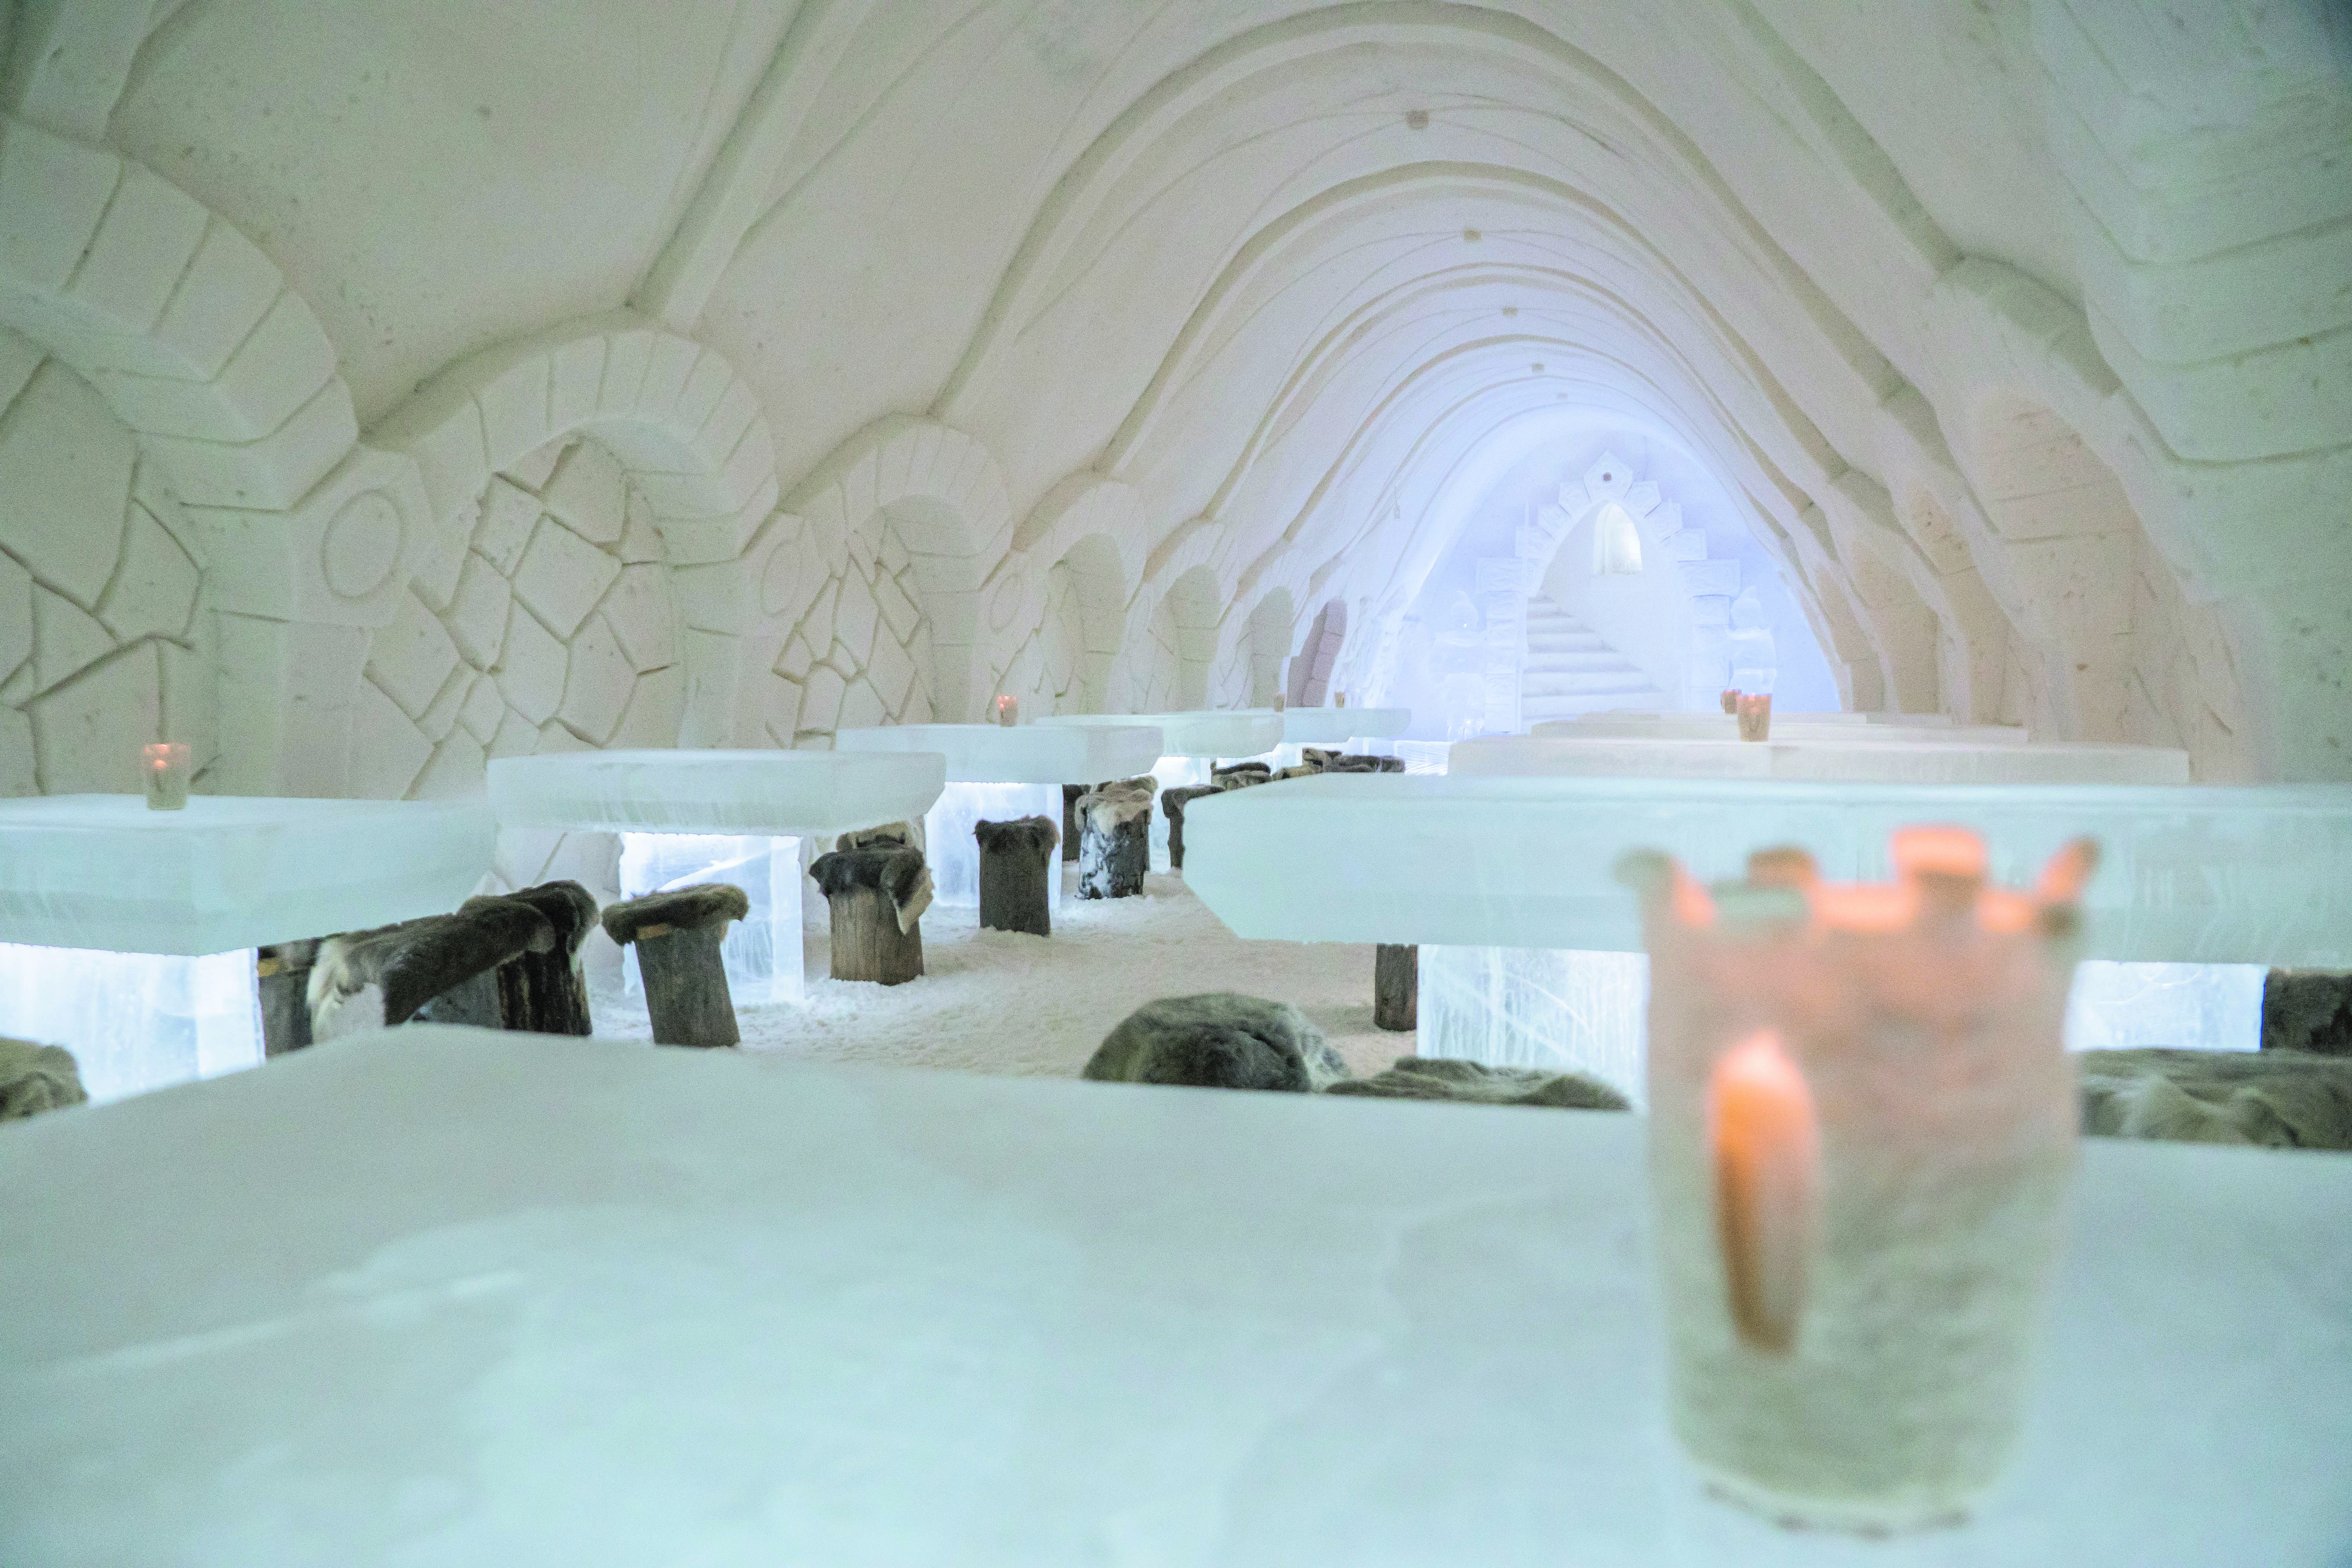 The interior of a snow castle